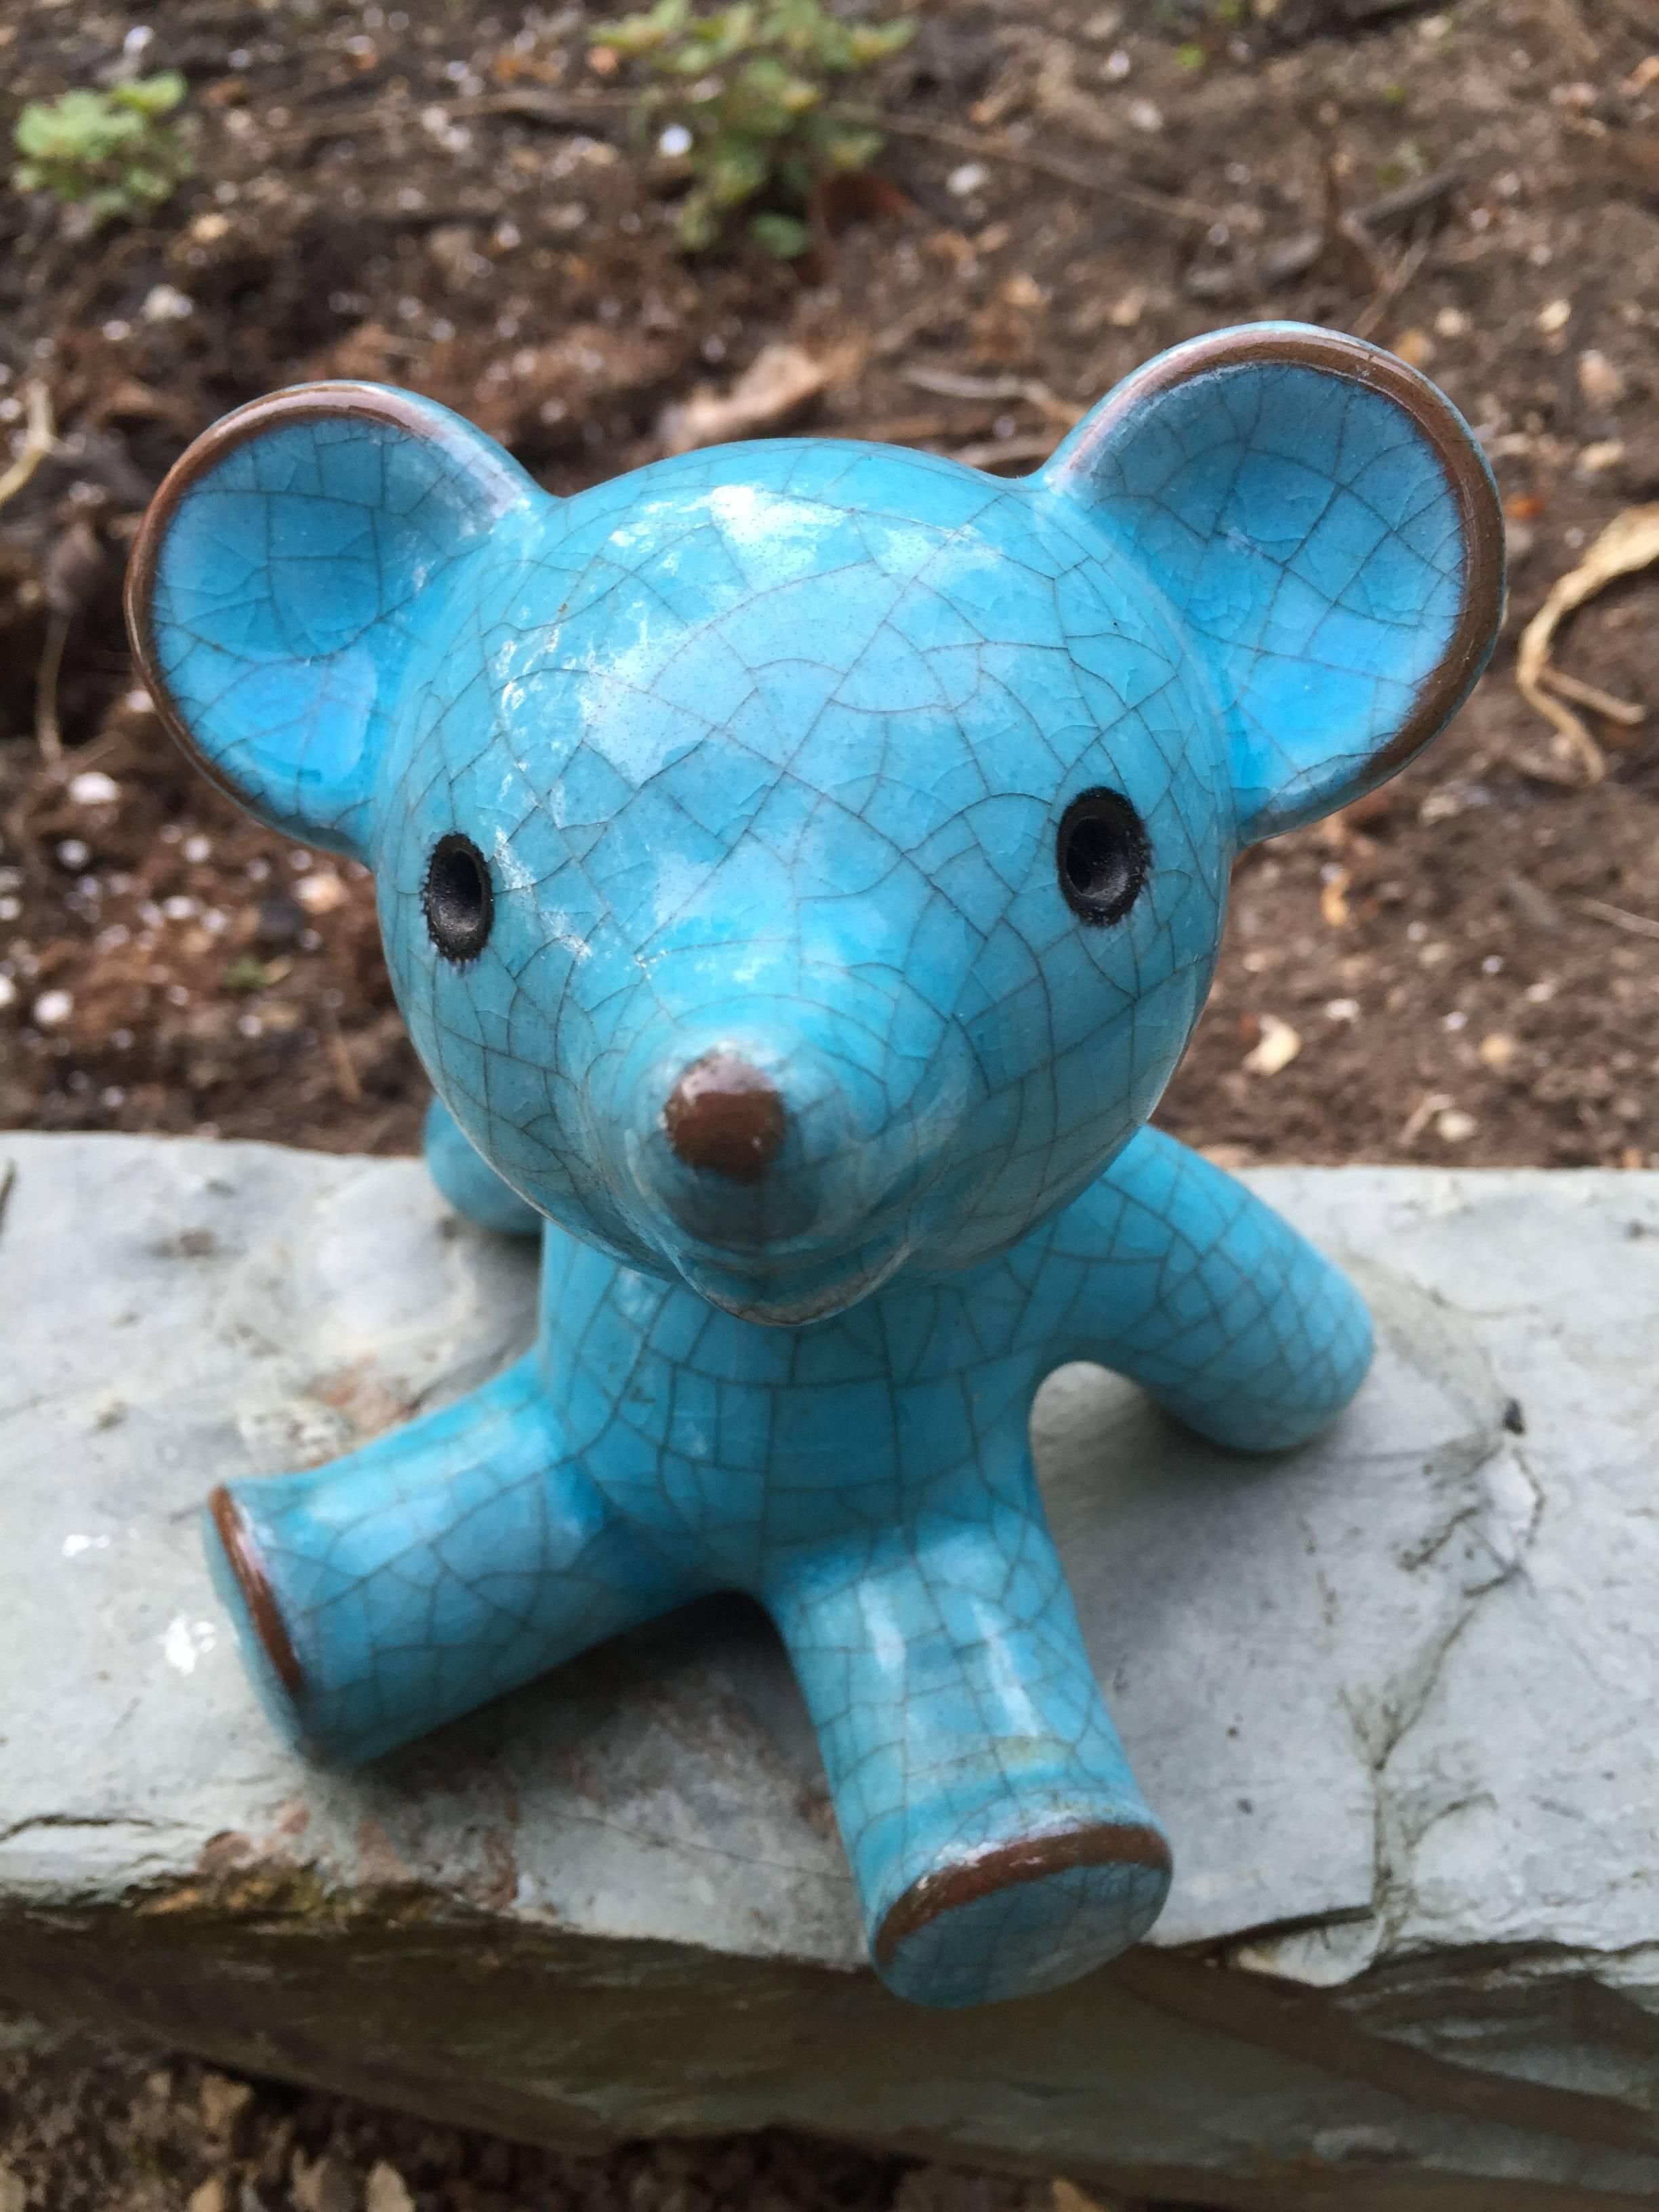 This is a wonderful little gem: German Arts and Crafts, a scarce Mid-Century 1950s hand blue glazed ceramic form of a teddy bear, Karlsruher Majolika by designer Walter Bosse, 4.5